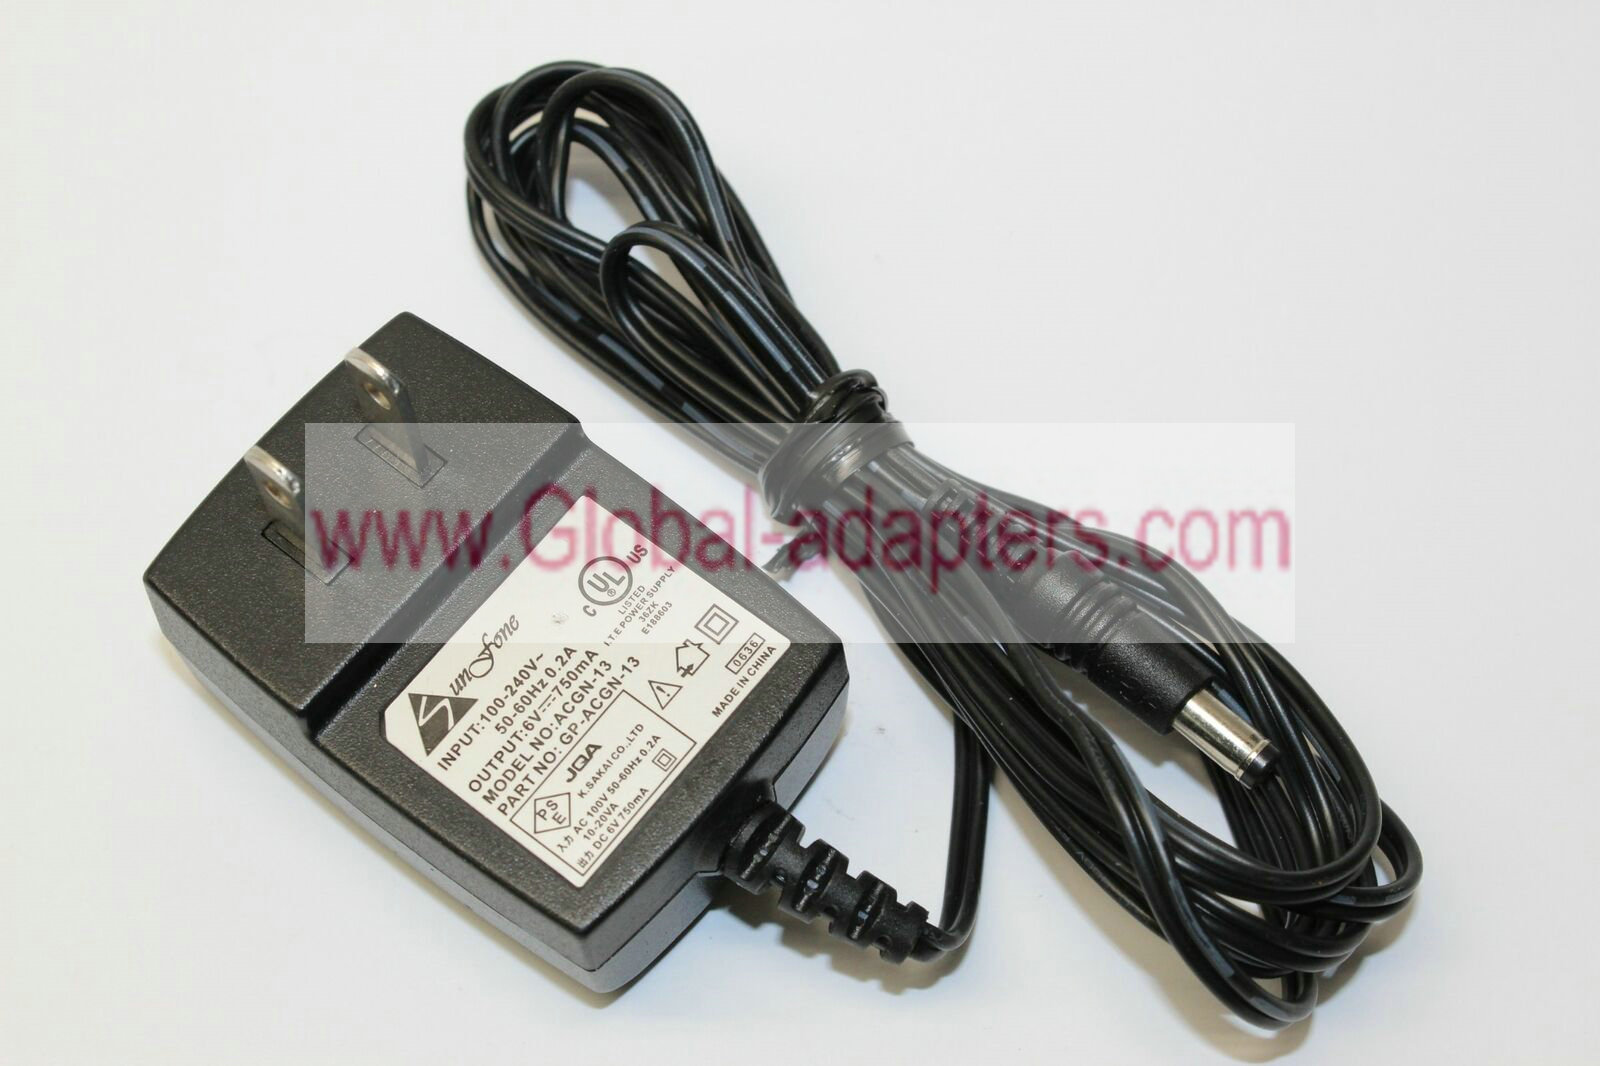 New Sunfone ACGN-13 GP-ACGN-13 Adaptor Power Supply 6V 750mA Transformer Adapter Charger